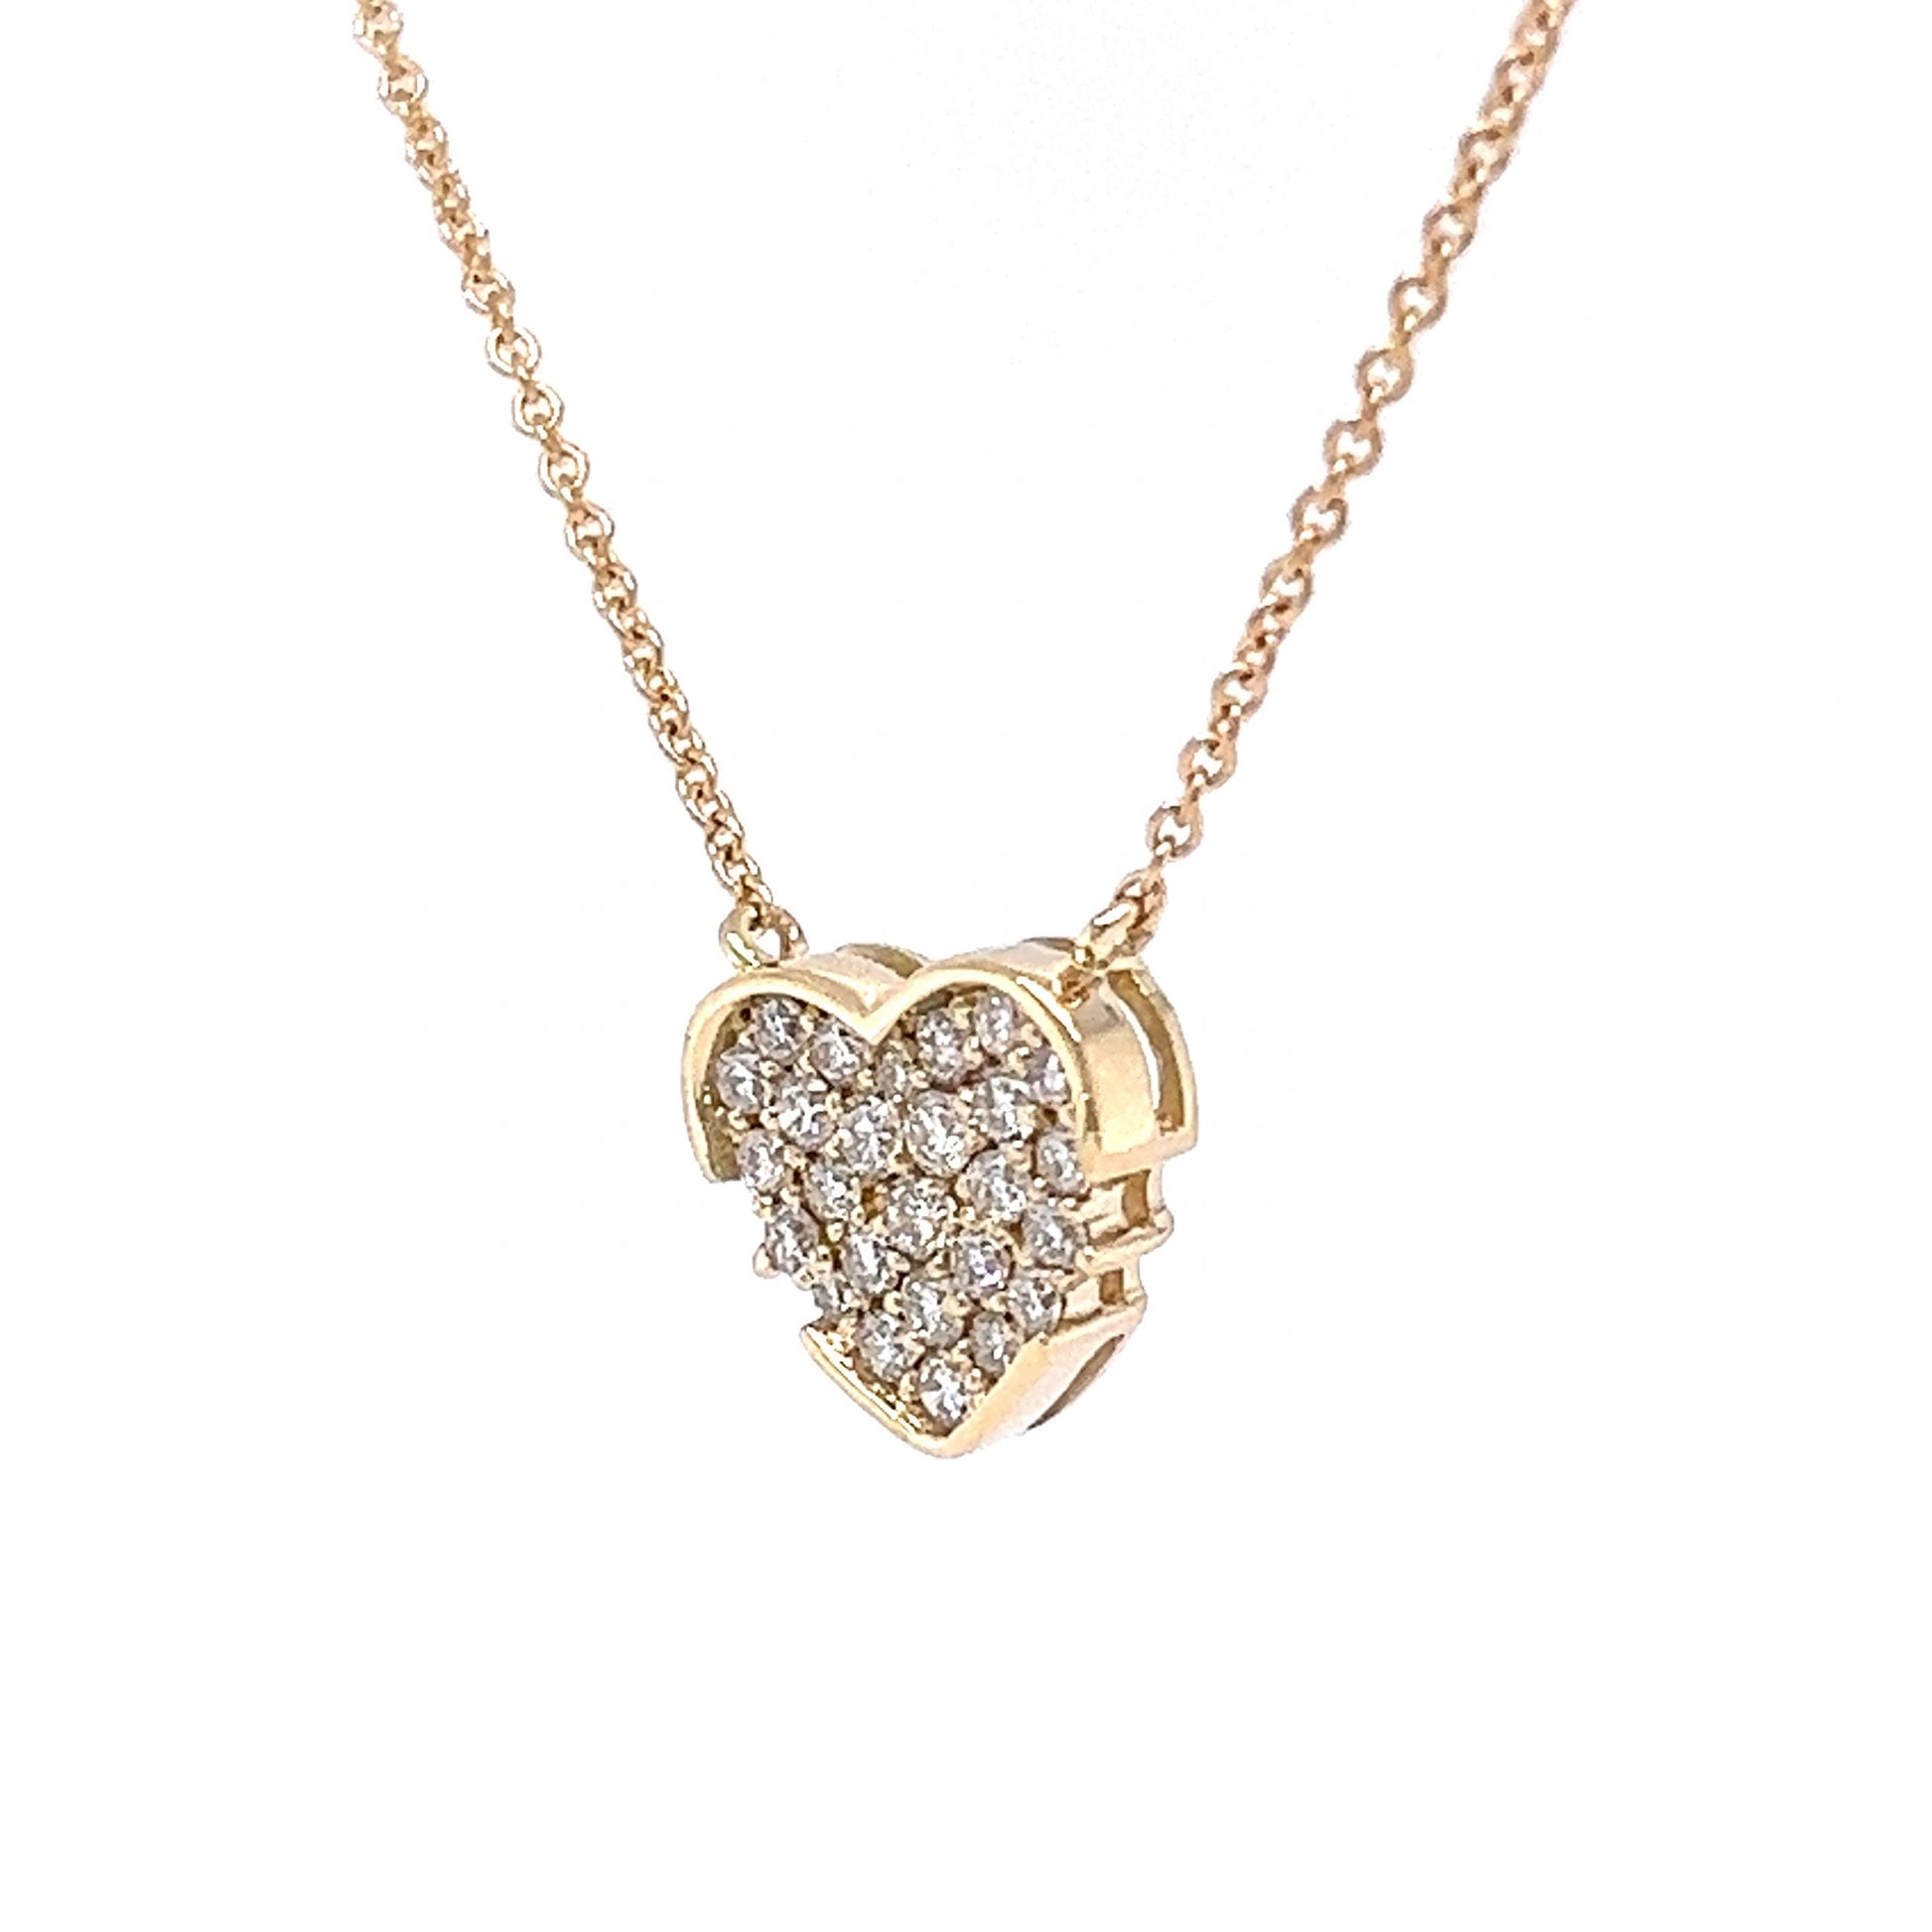 Diamond Pave Heart Pendant Necklace in 14k Yellow GoldComposition: 14 Karat Yellow Gold Total Diamond Weight: .25ct Total Gram Weight: 2.2 g Inscription: 14k
      